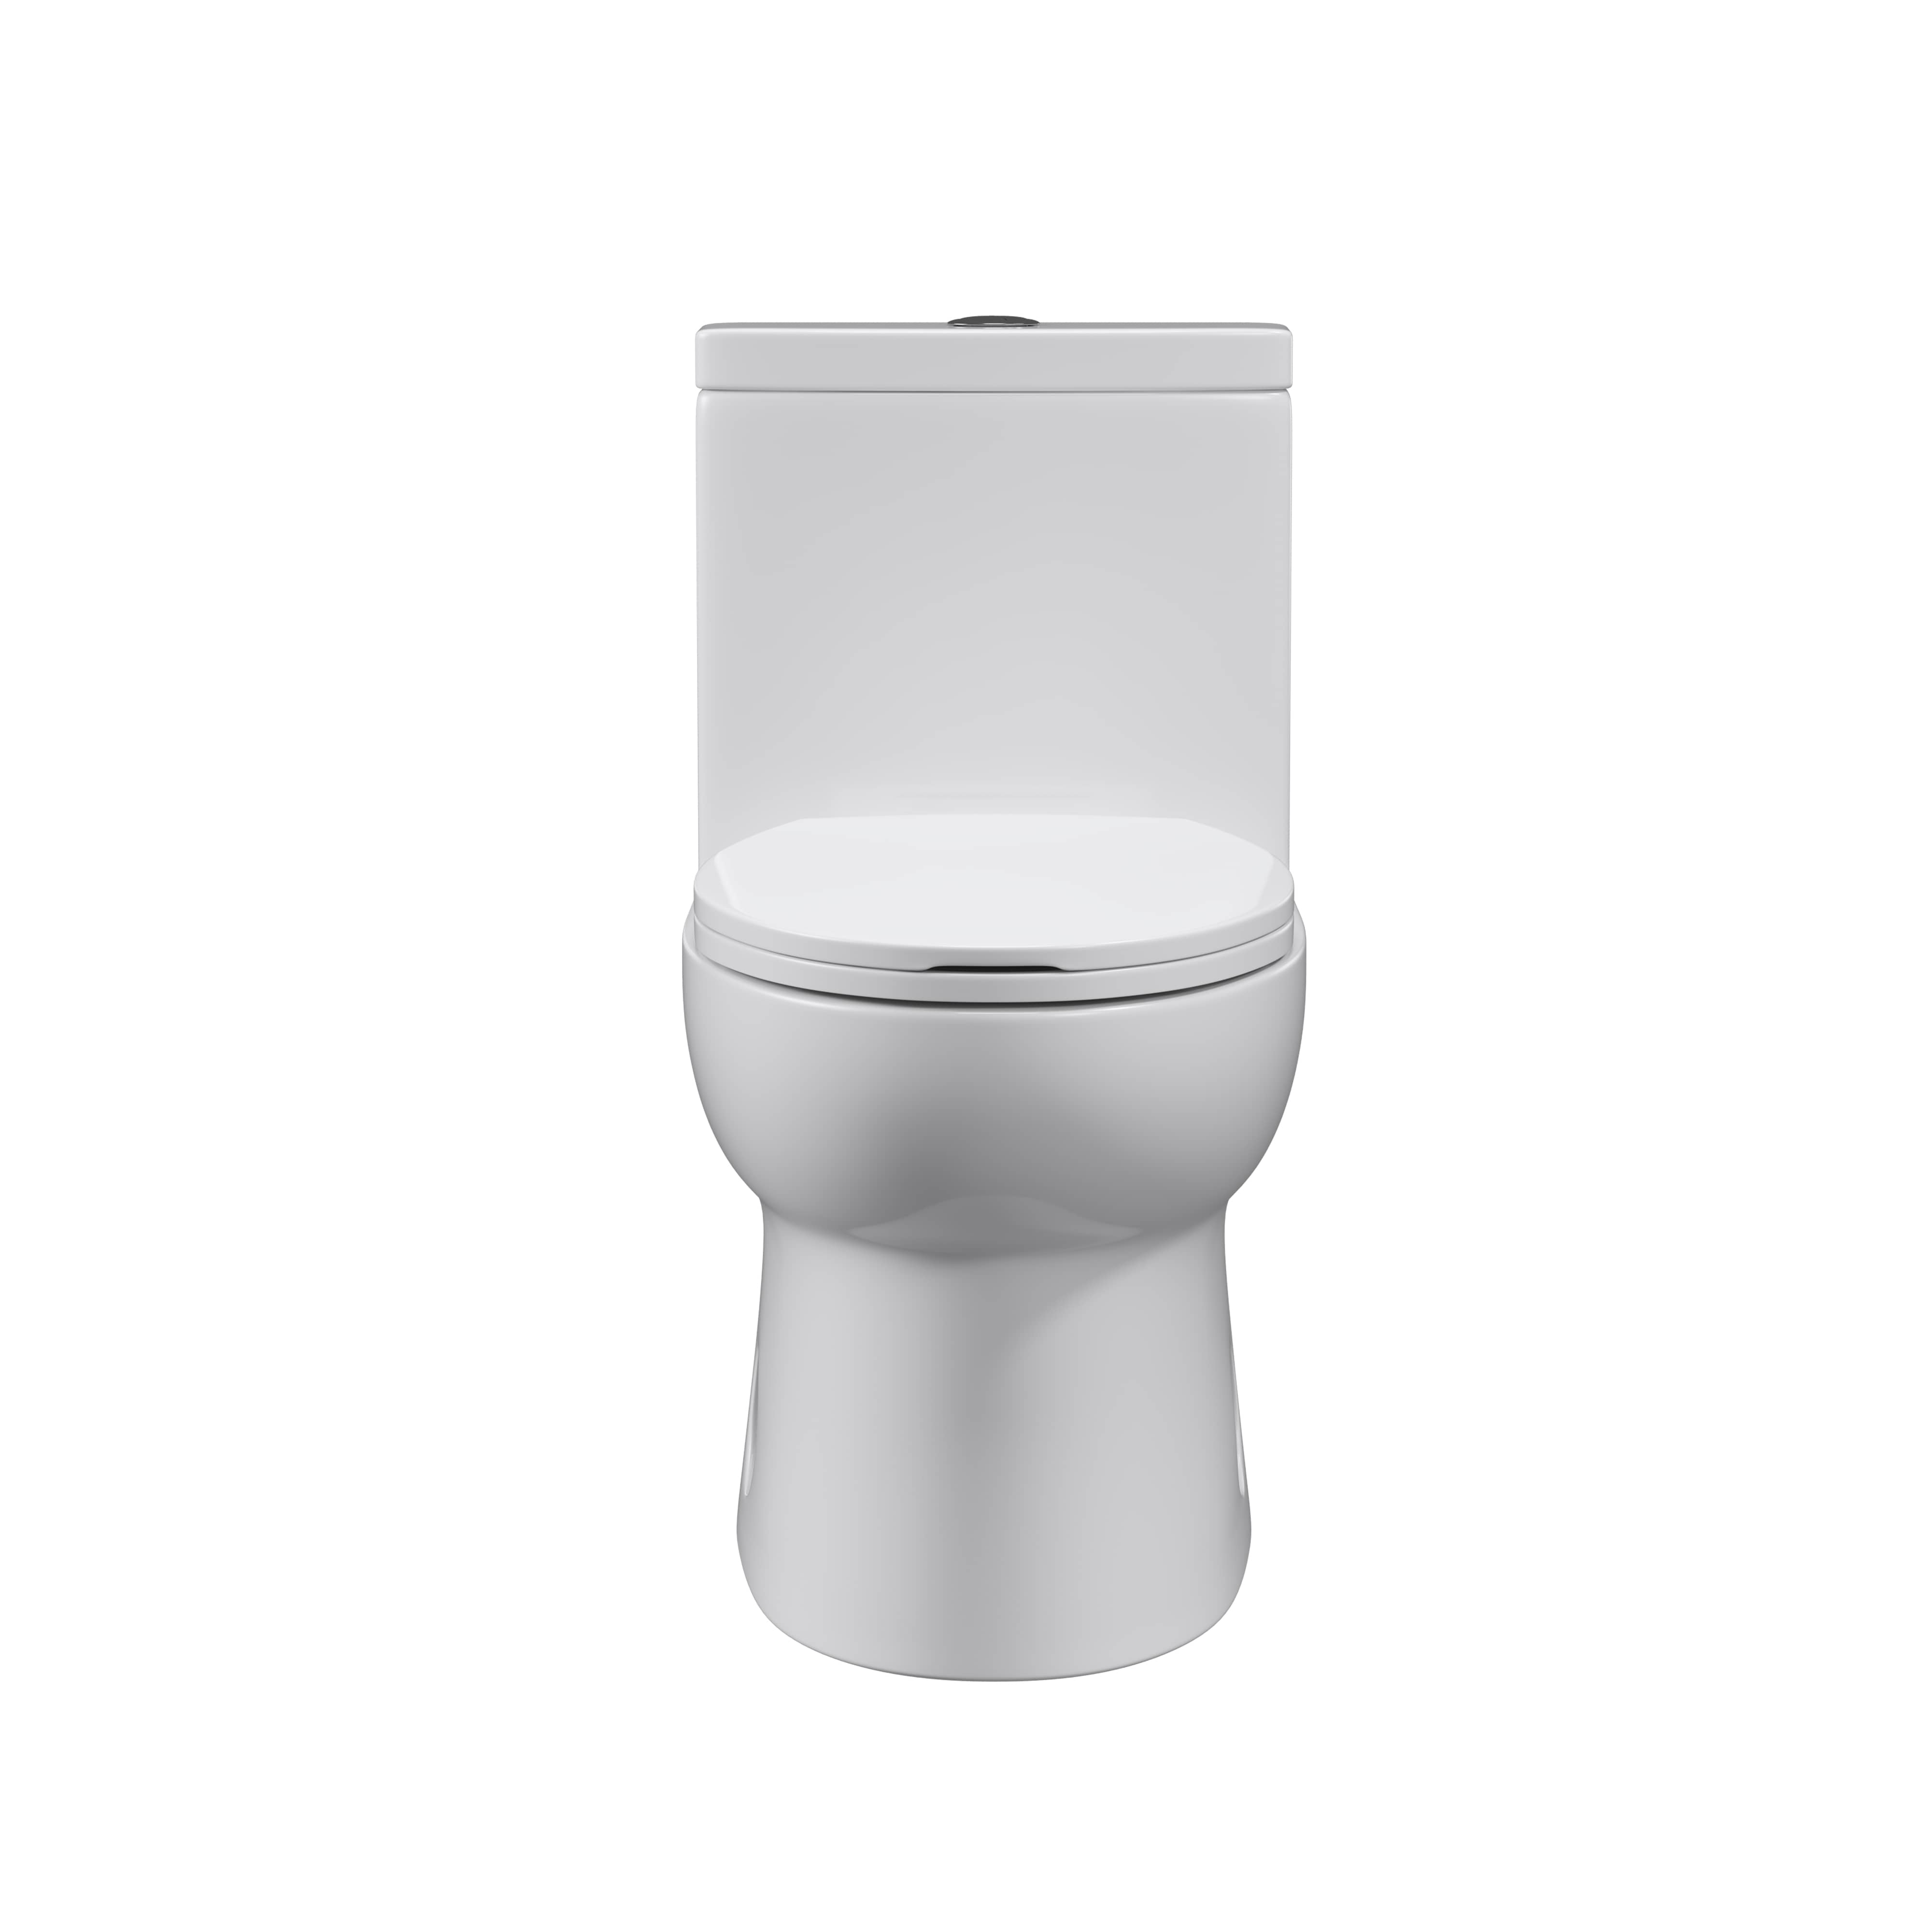 Dual Flush Elongated Standard One Piece Toilet with Soft Close Seat Cover, High-Efficiency Supply, and White Finish Toilet Bowl (White Toilet)